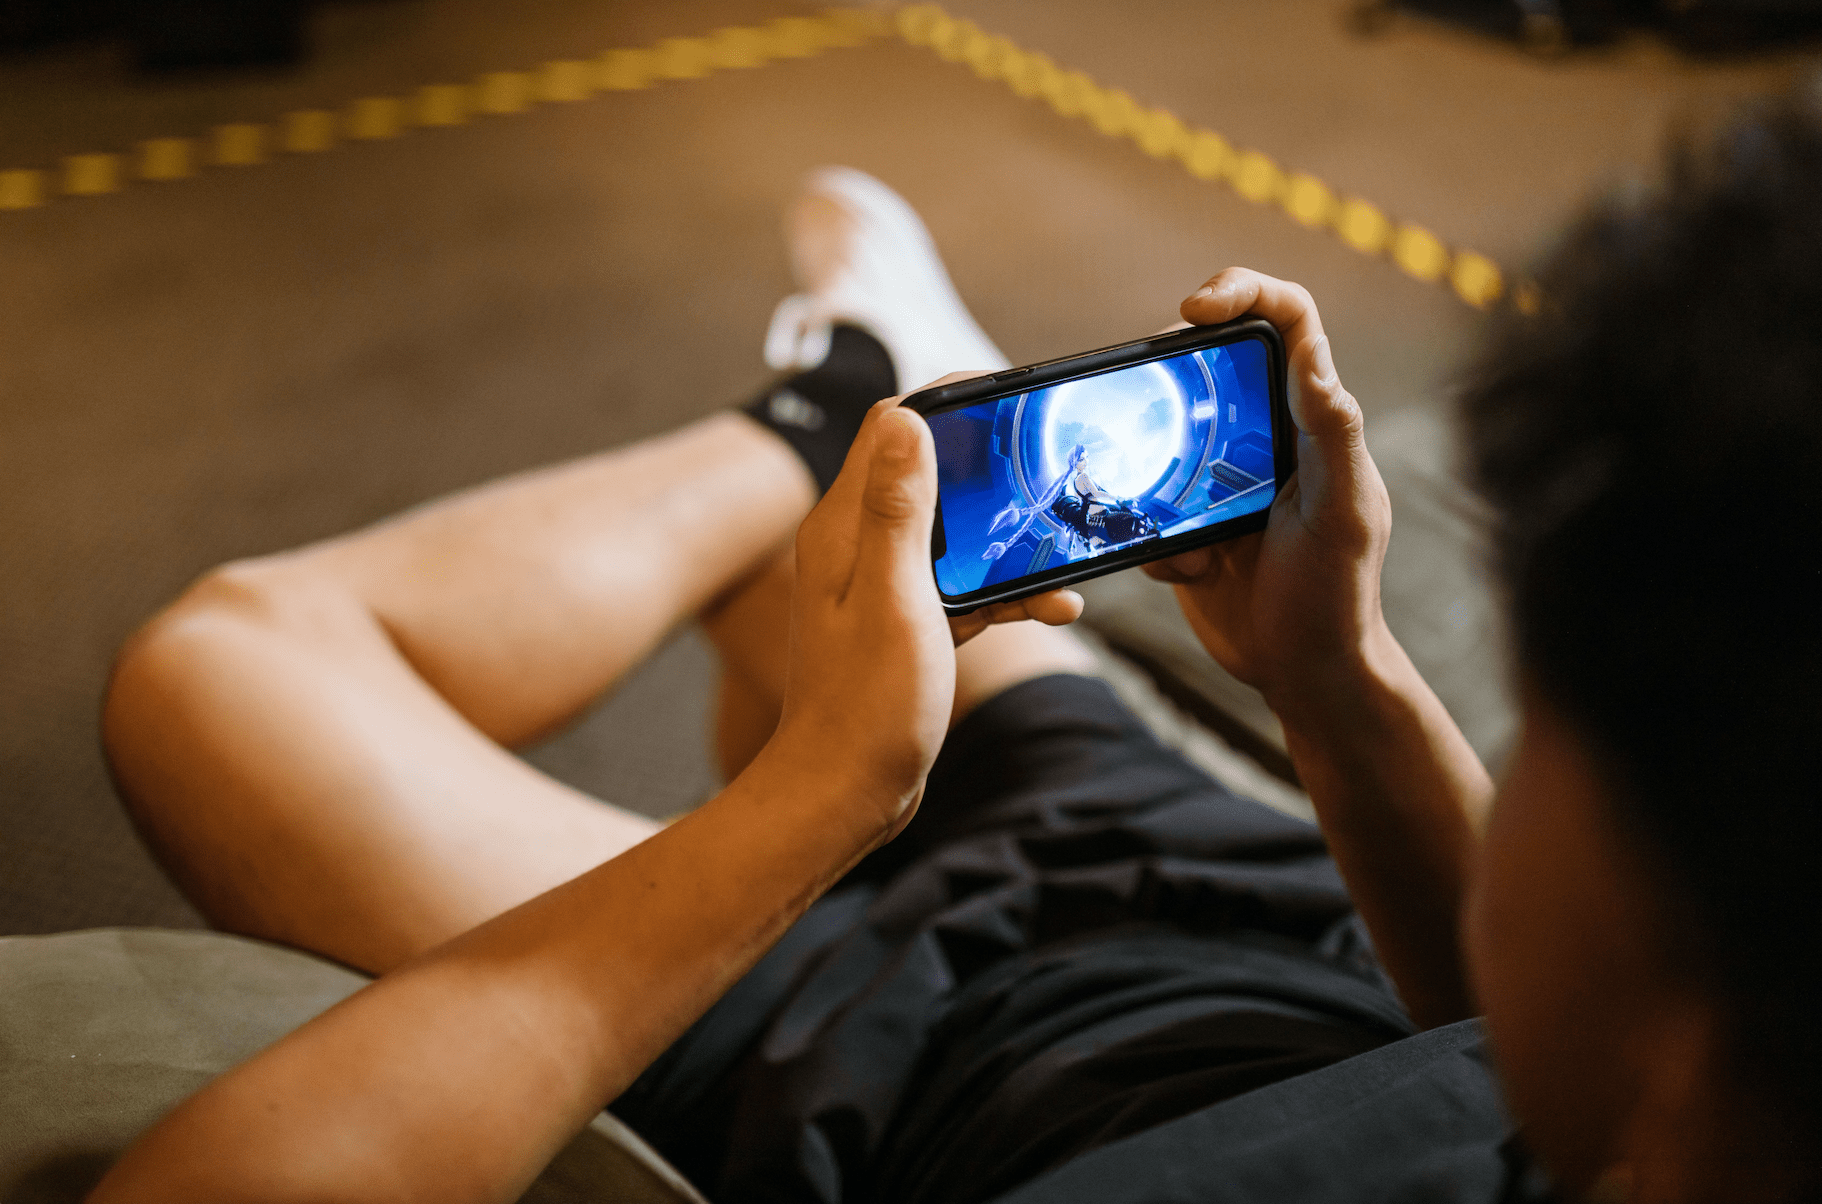 Video advertisements with pretend gameplay, why do they work, and can they stick round? – Apptamin